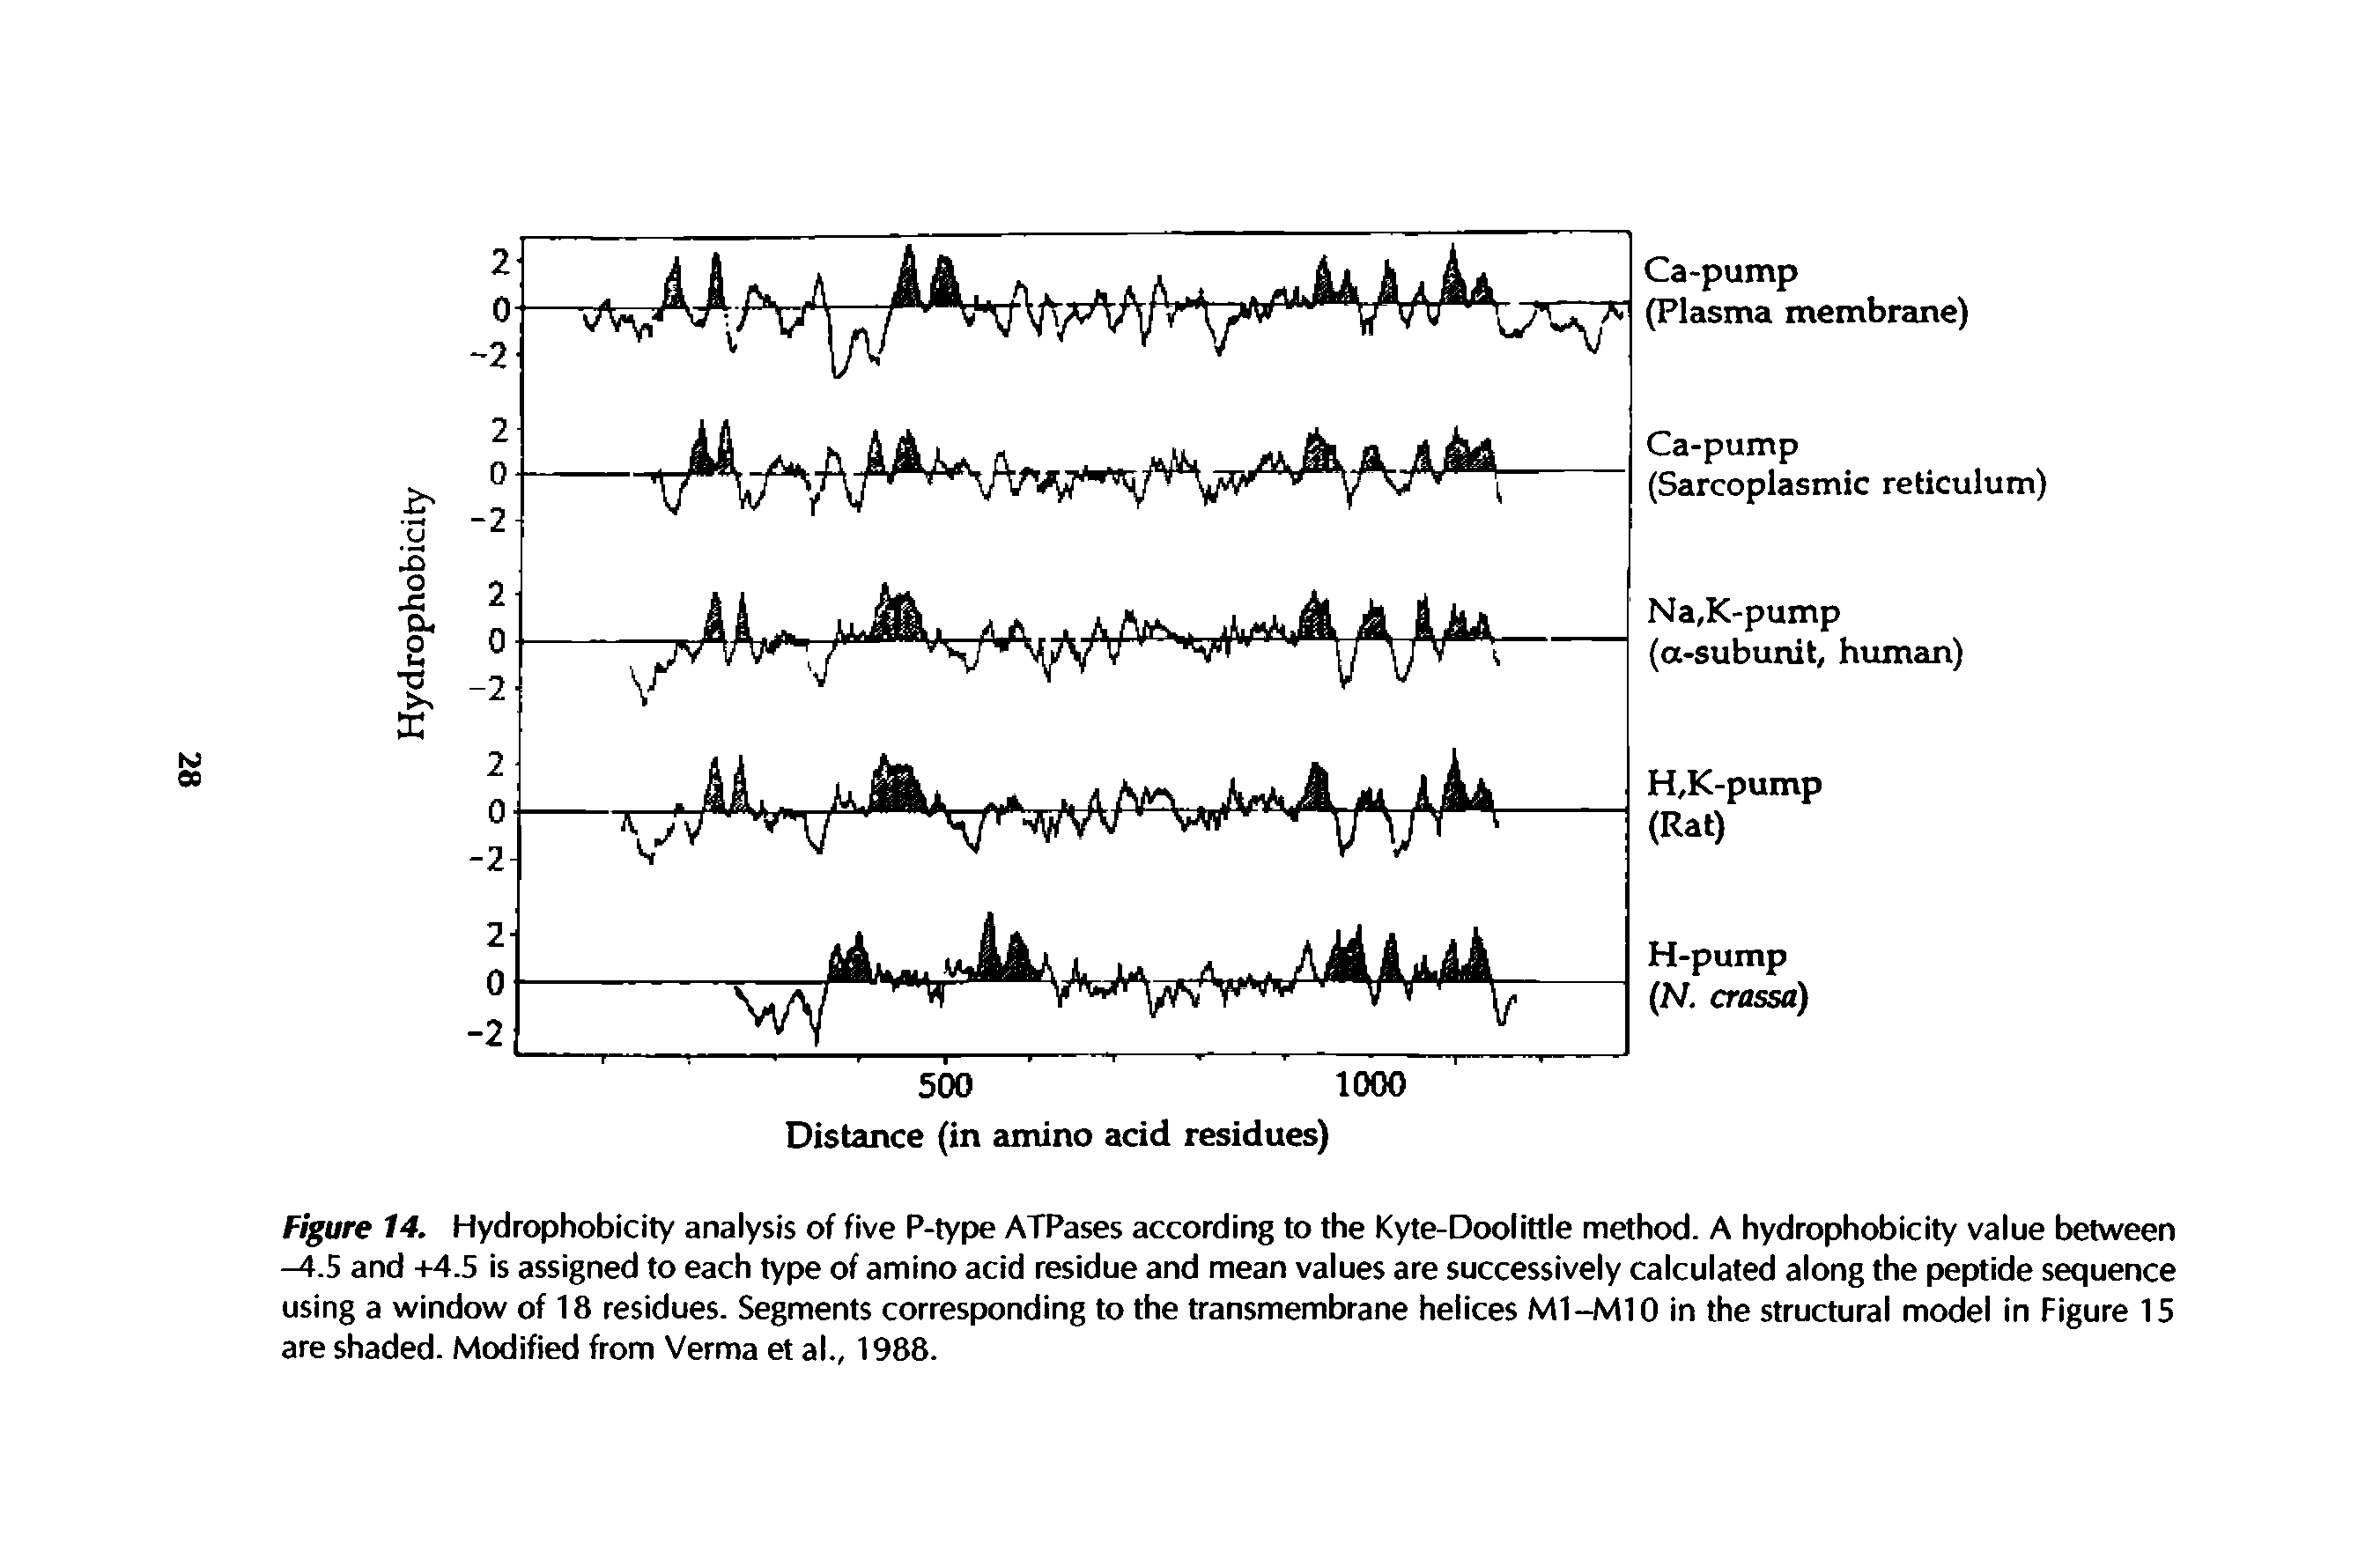 Figure 14. Hydrophobicity analysis of five P-type ATPases according to the Kyte-Doolittle method. A hydrophobicity value between -4.5 and +4.5 is assigned to each type of amino acid residue and mean values are successively calculated along the peptide sequence using a window of 18 residues. Segments corresponding to the transmembrane helices M1-M10 in the structural model in Figure 15 are shaded. Modified from Verma et al., 1988.